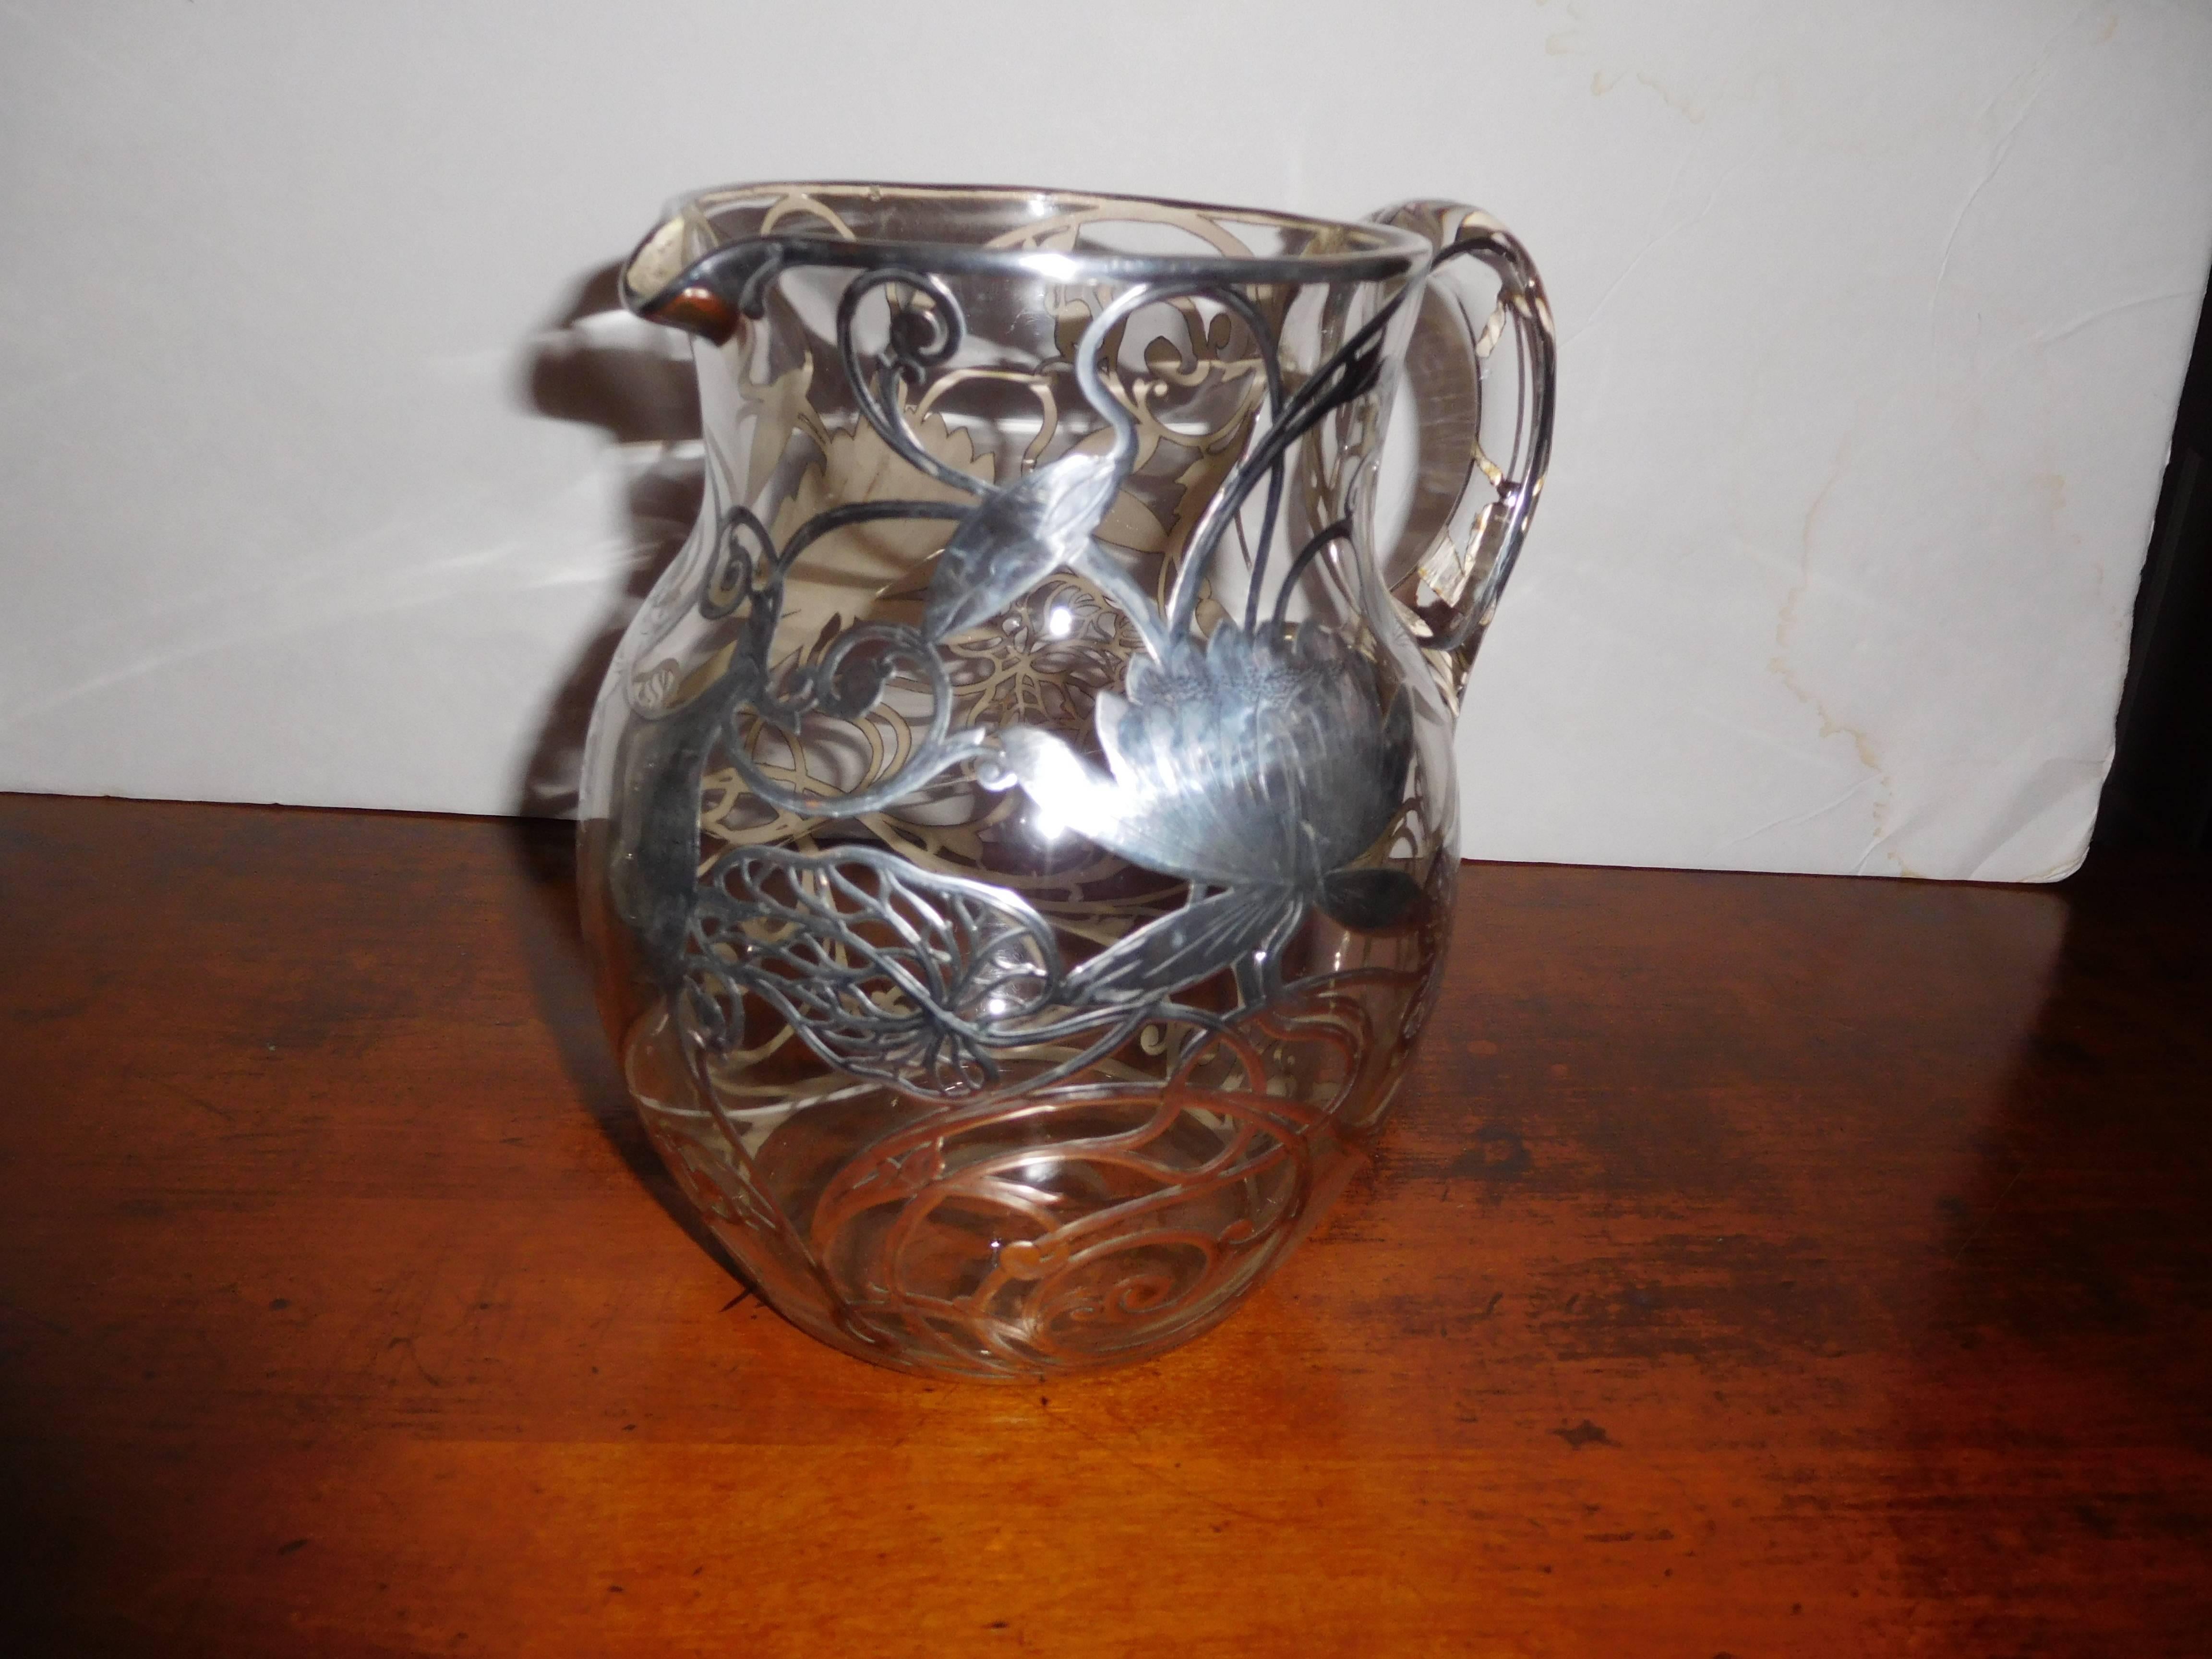 A truly beautiful sterling silver overlay on crystal vase or pitcher.